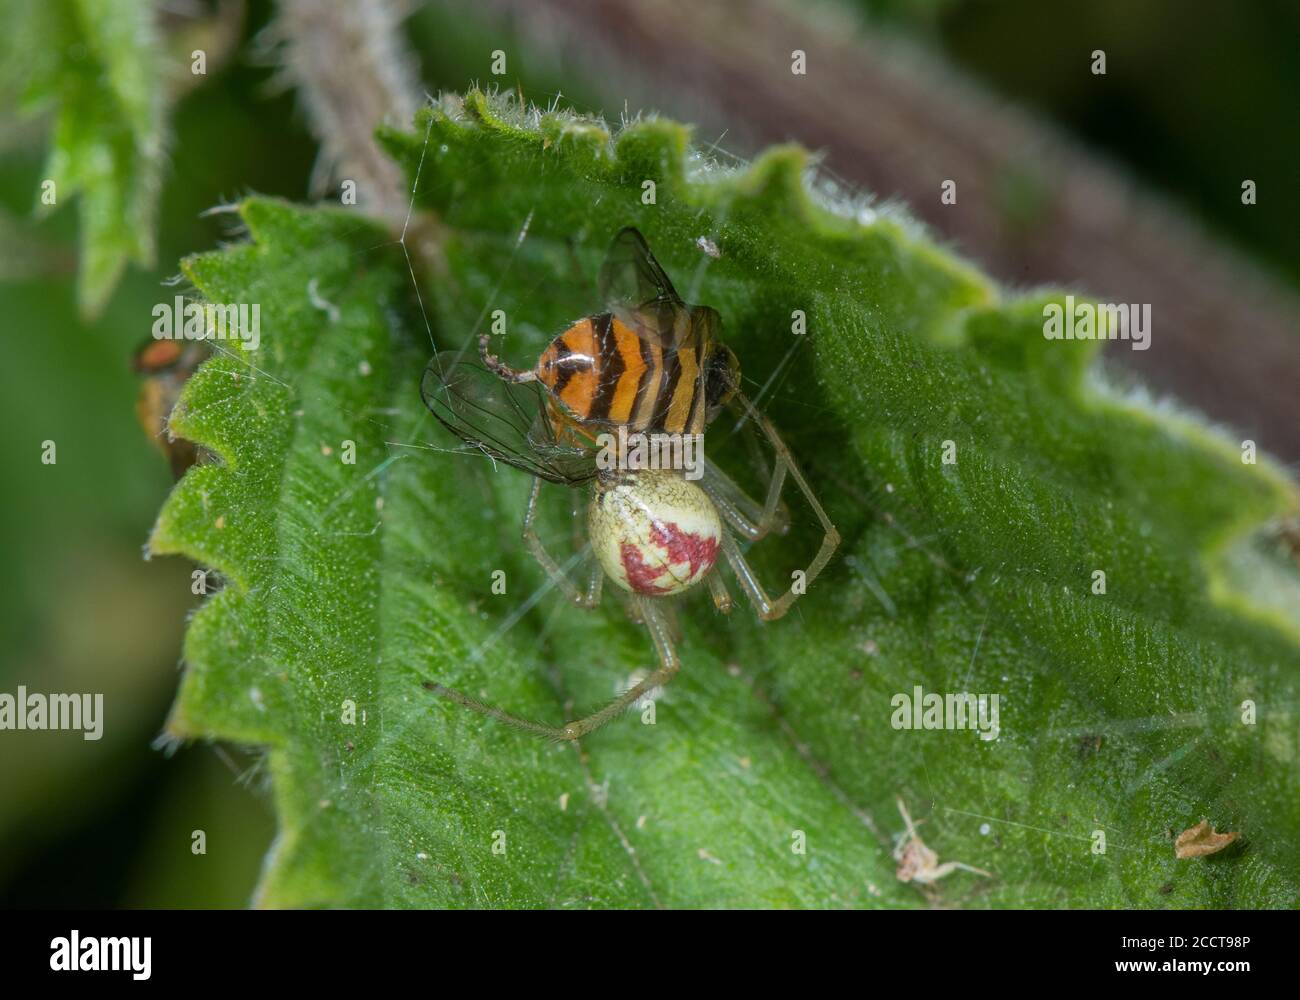 Common Candy-striped Spider, Enoplognatha ovata, as forma redimita, with hoverfly prey. Stock Photo